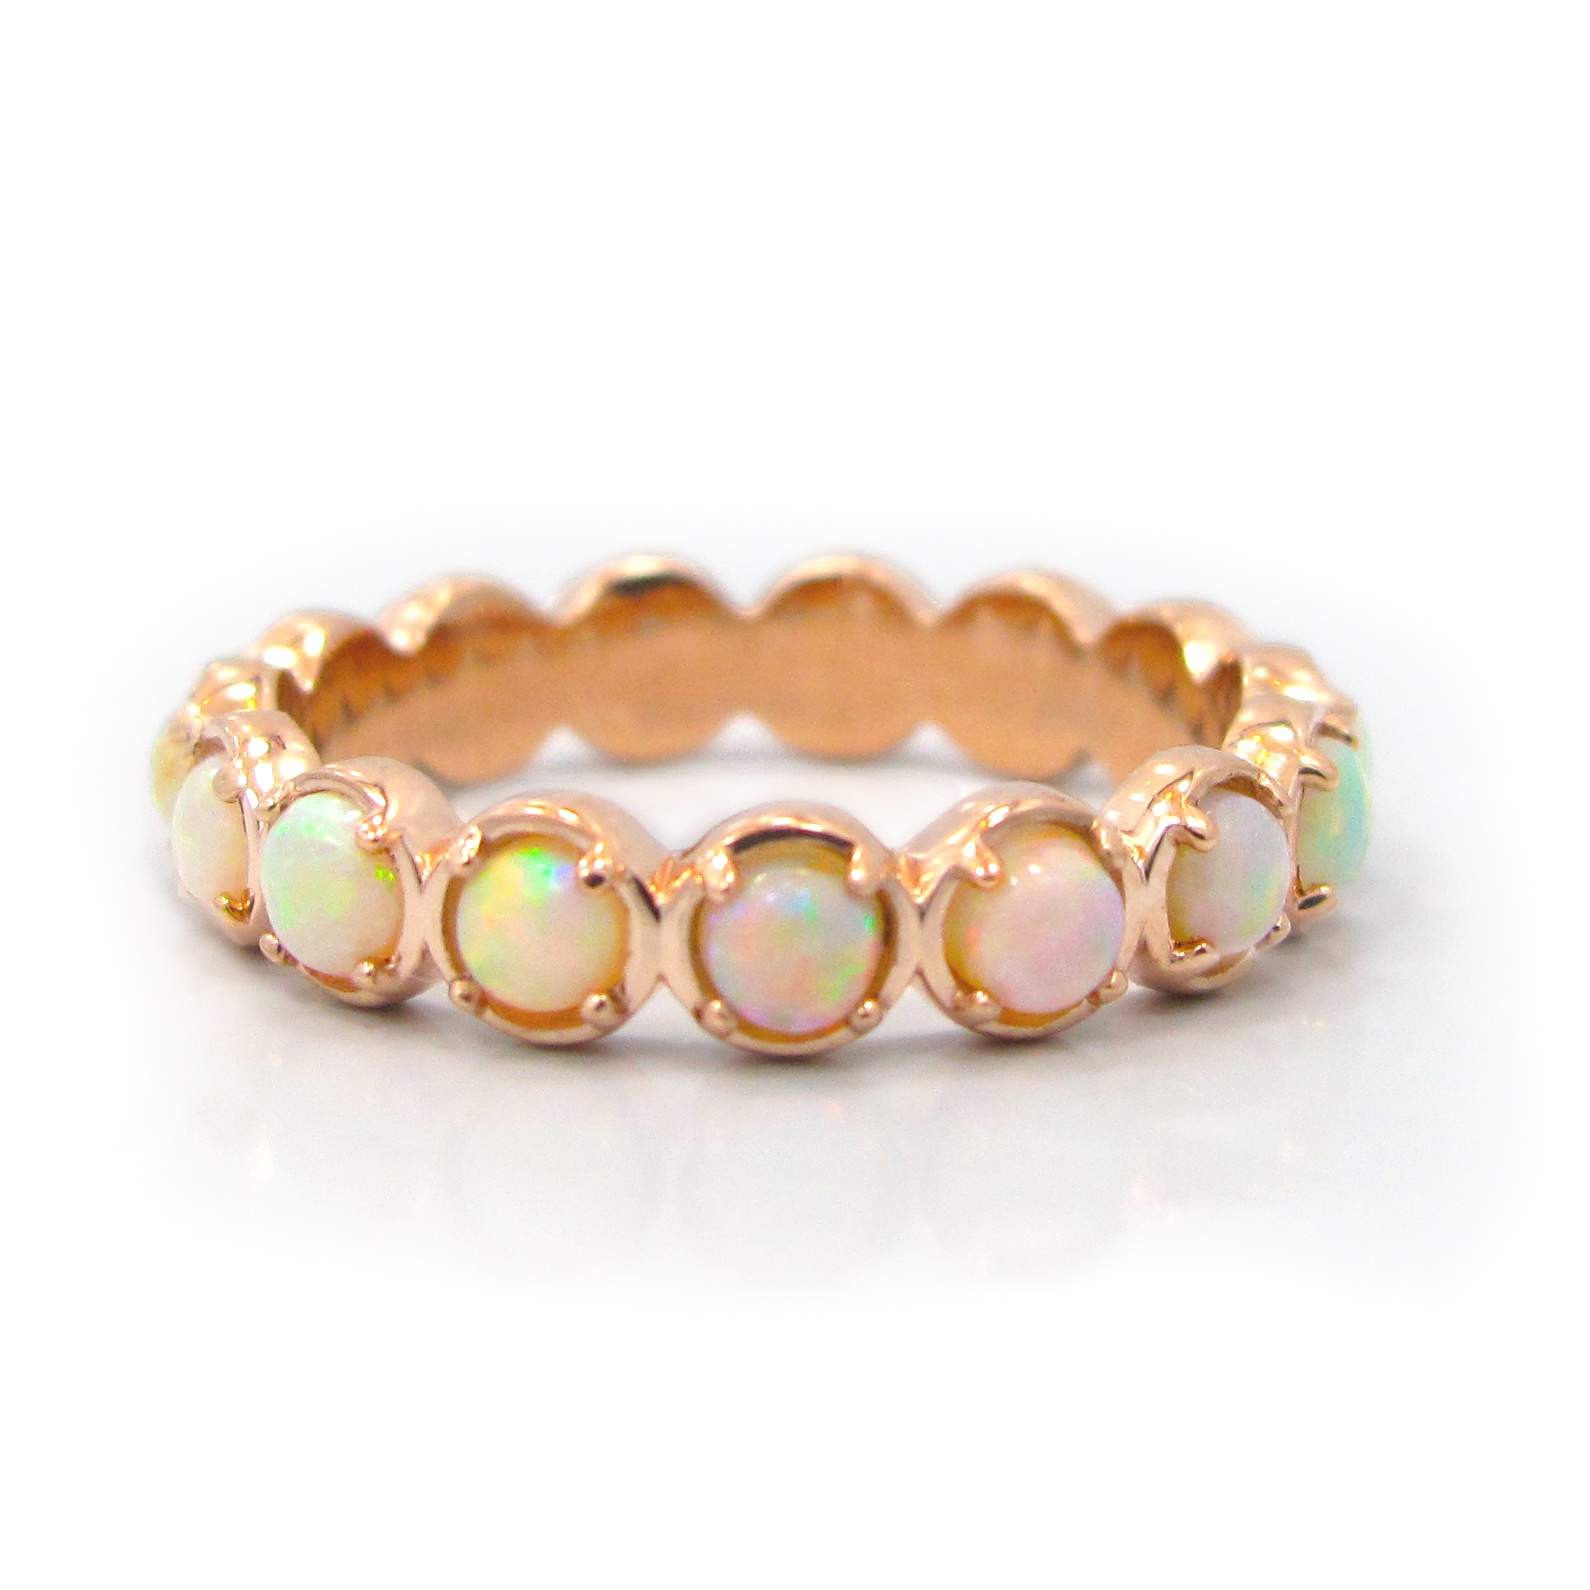 This is a picture of a 14k Rose Gold Opal Eternity Band